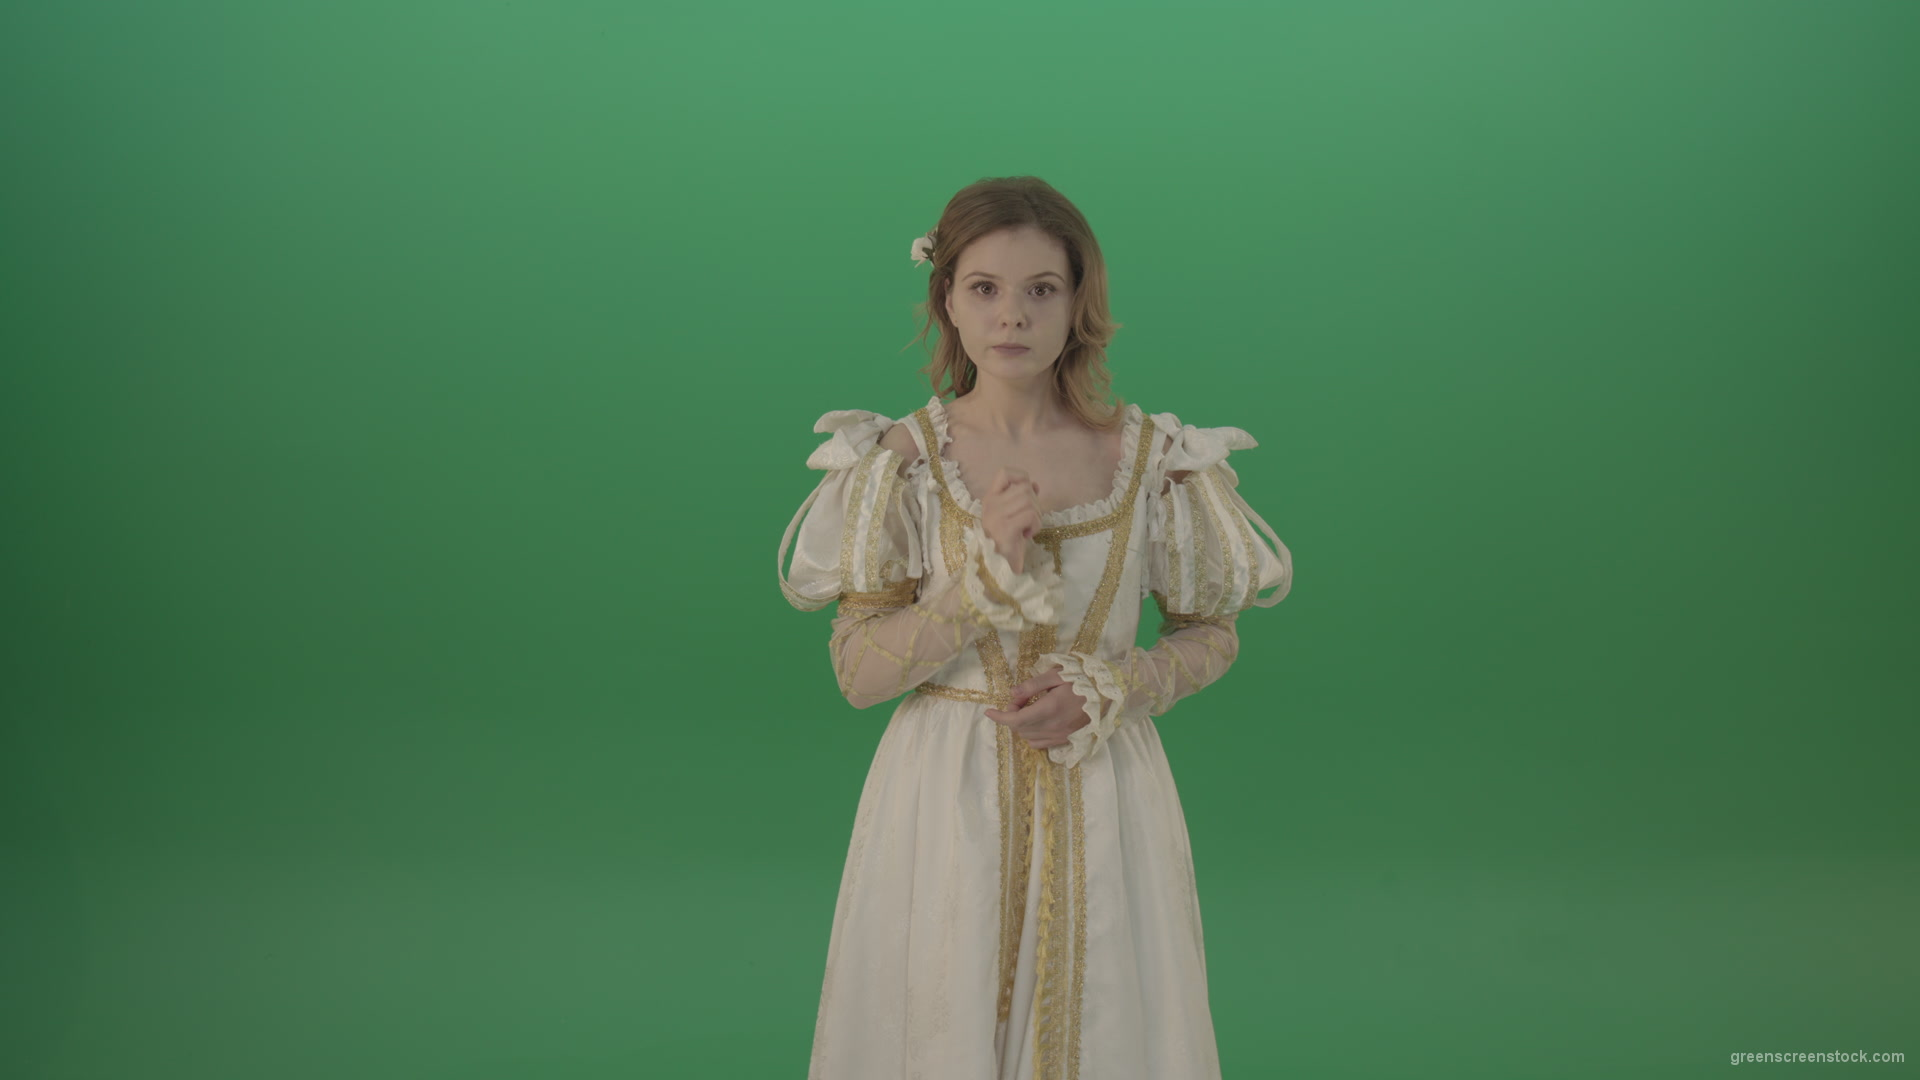 Girl-asks-to-be-quieter-in-a-white-dress-isolated-on-green-screen_009 Green Screen Stock